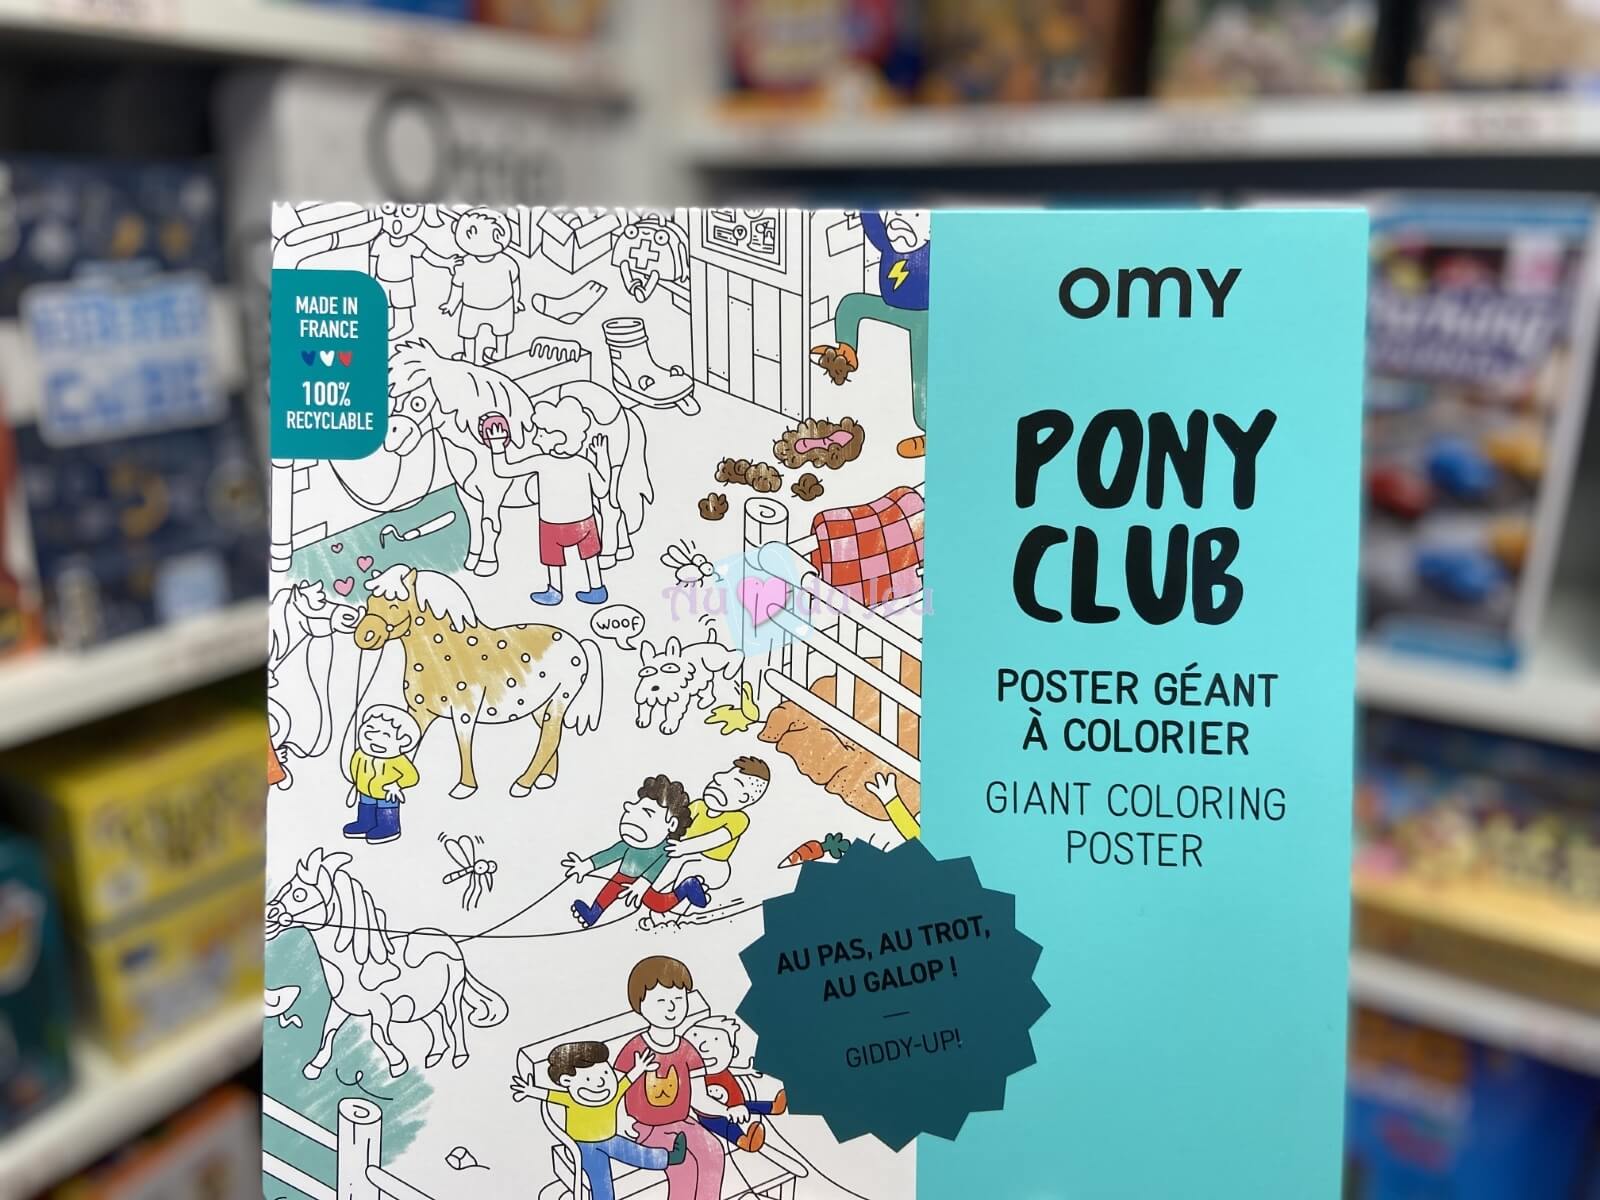 Poster Géant A Colorier Poney Club OMY